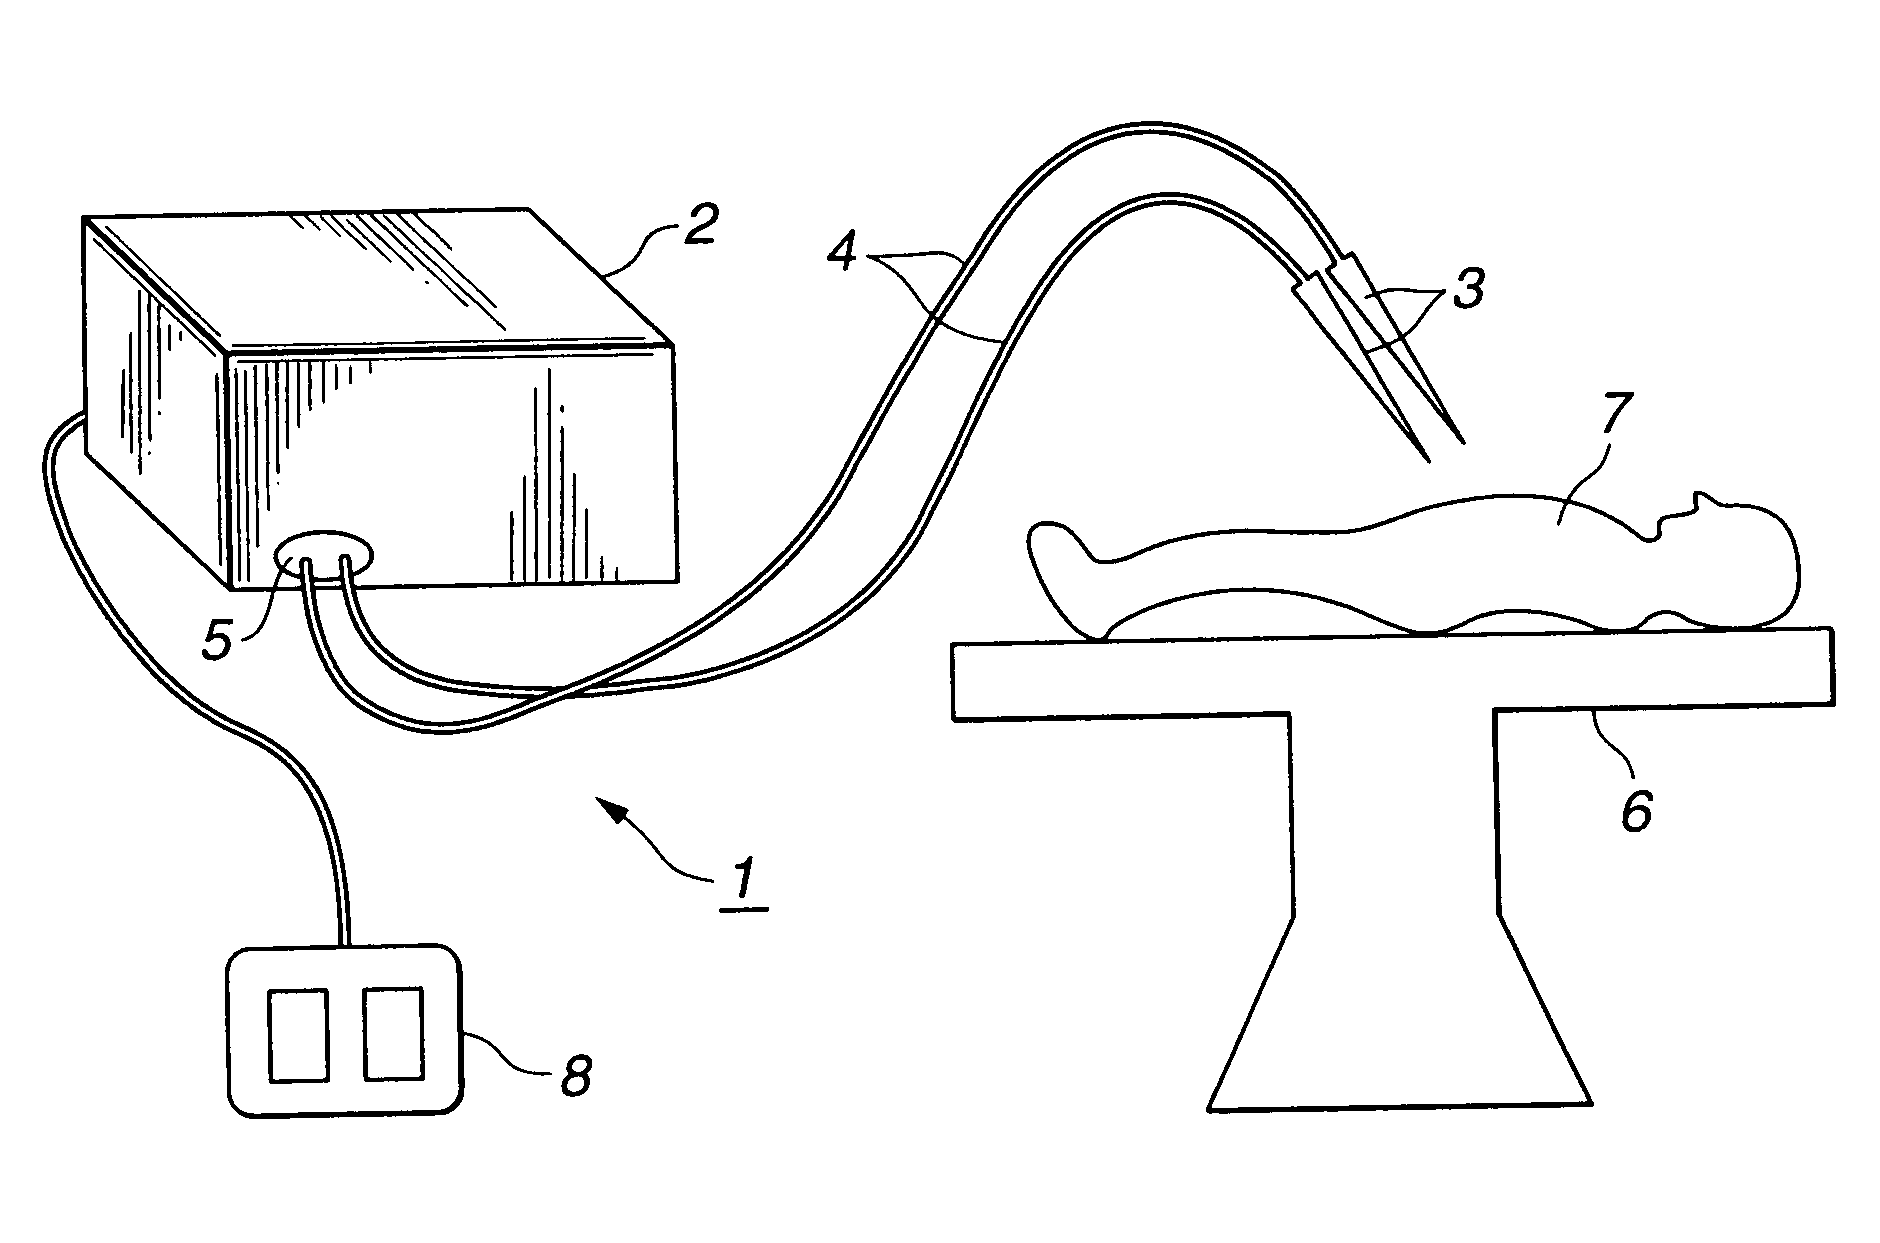 Electric operation apparatus